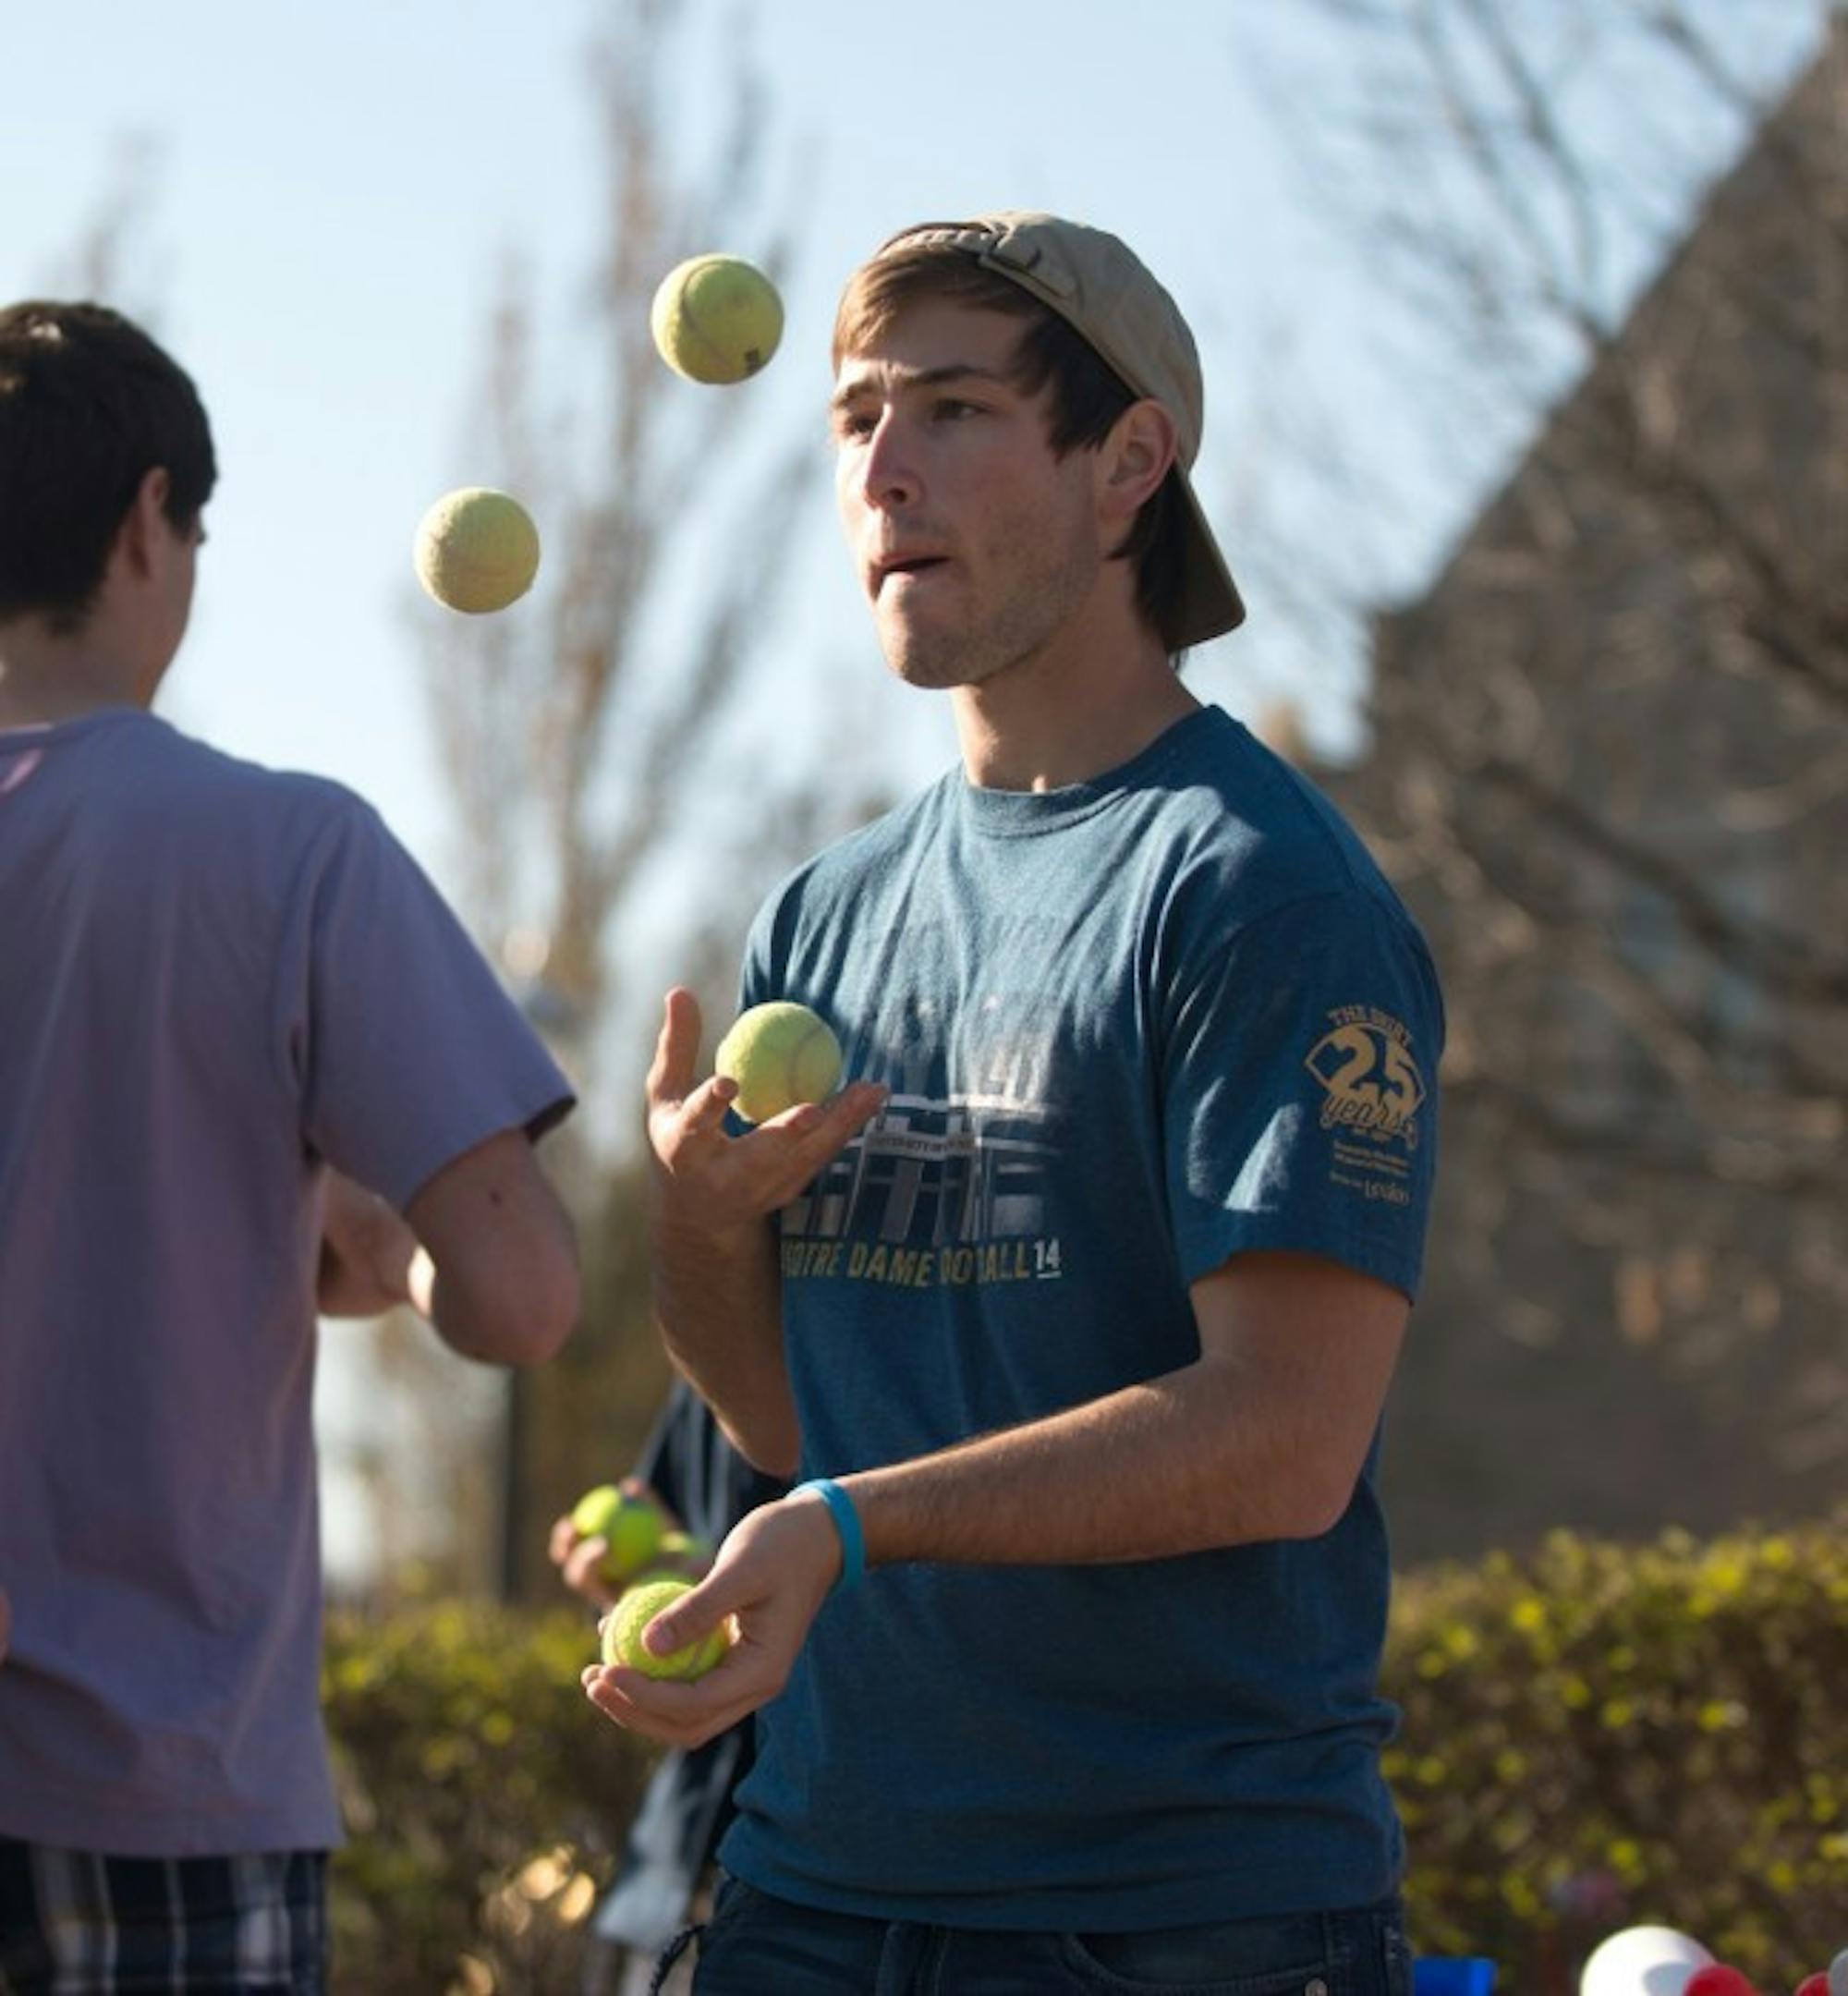 A member of the Notre Dame juggling club develops his juggling skills with tennis balls.